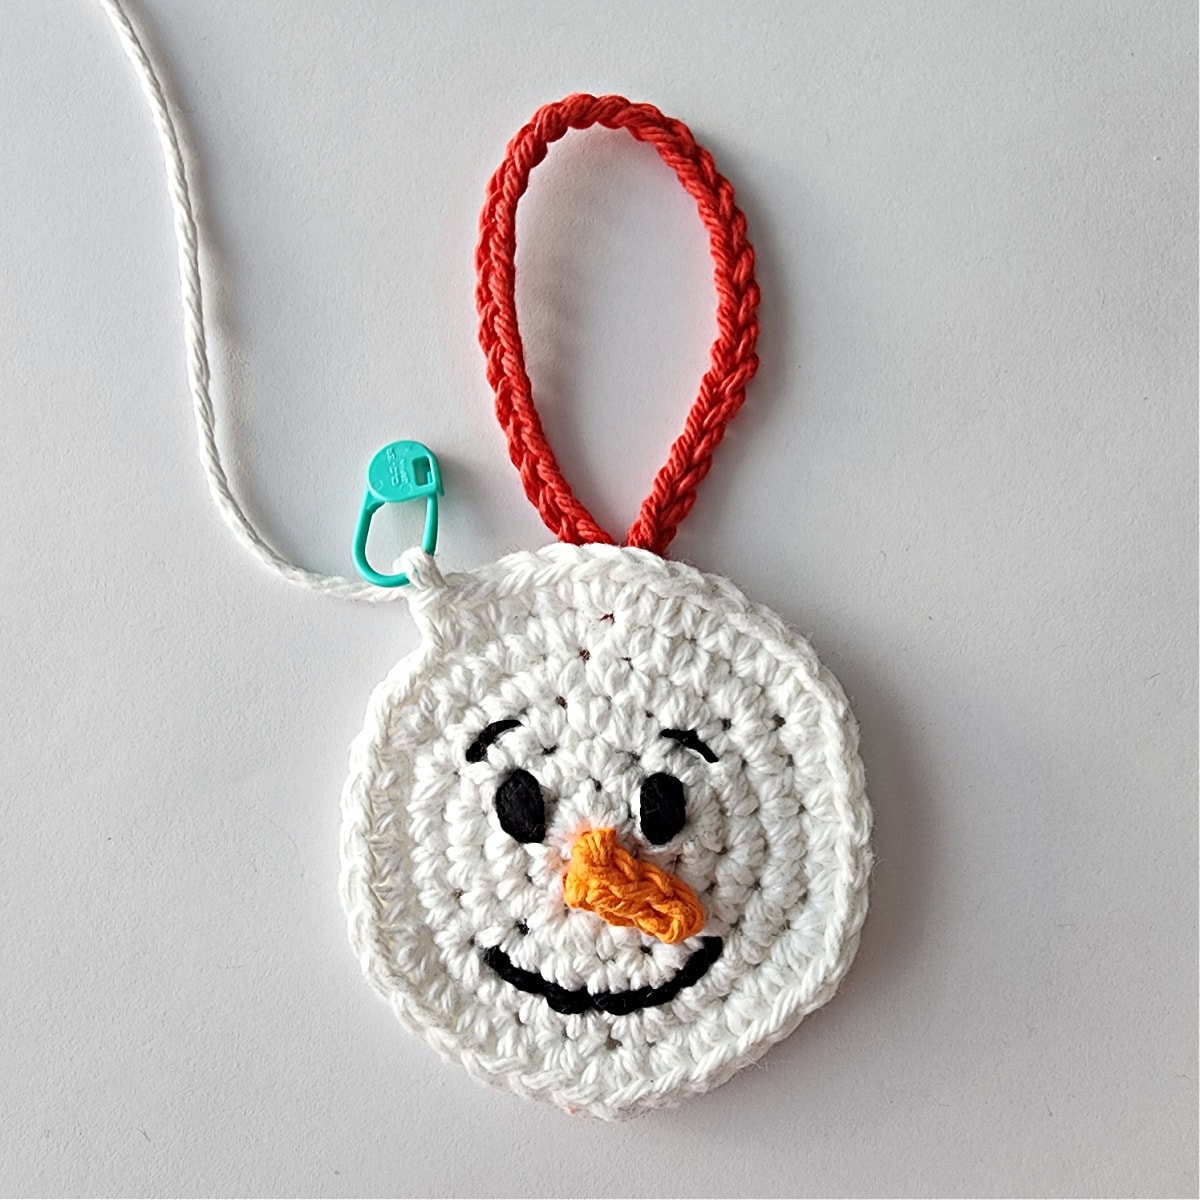 crochet snowman ornament being joined with two layers